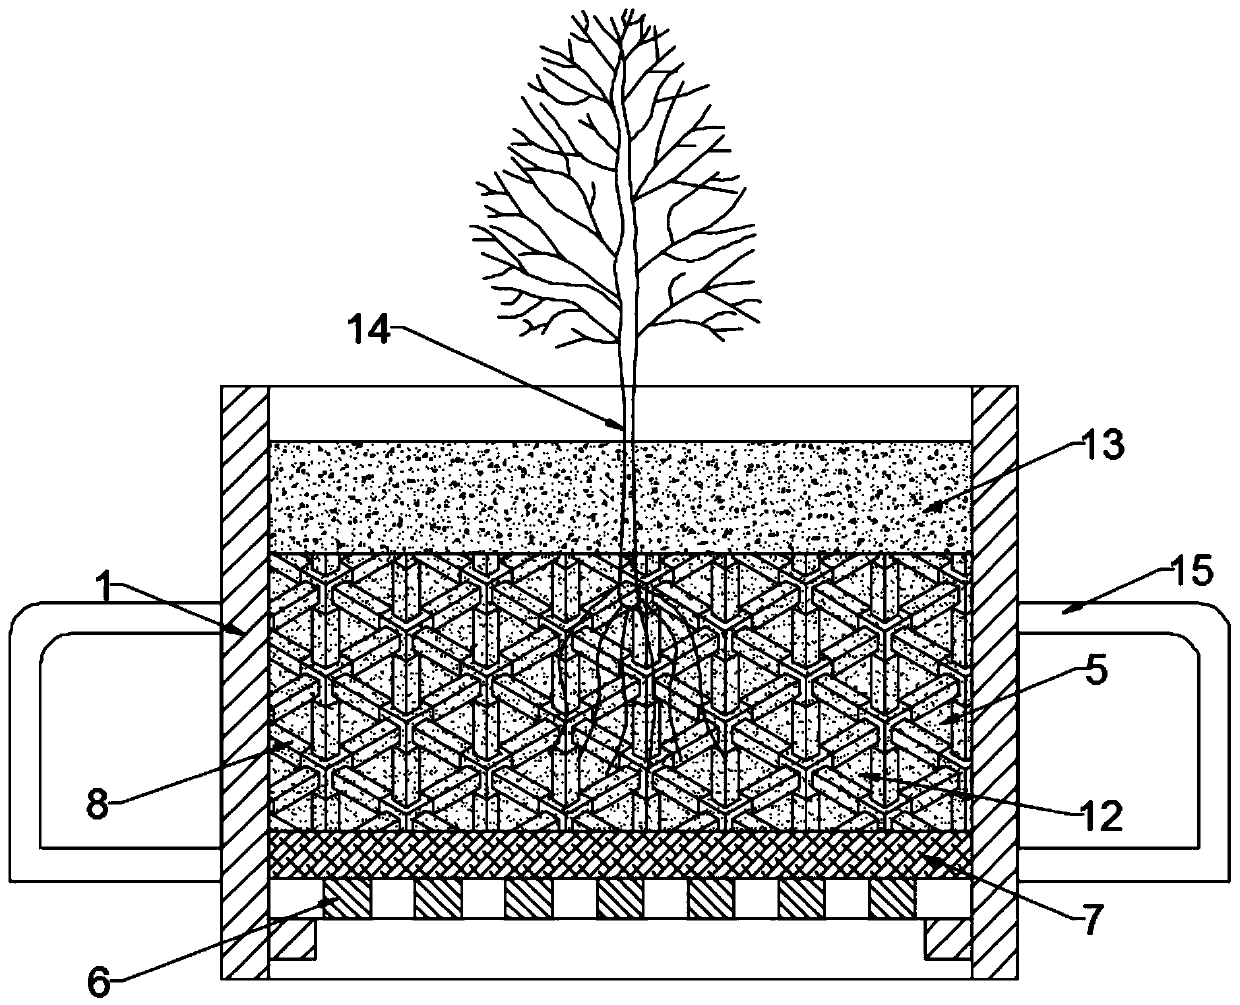 Nursery stock planting device for ecological remediation